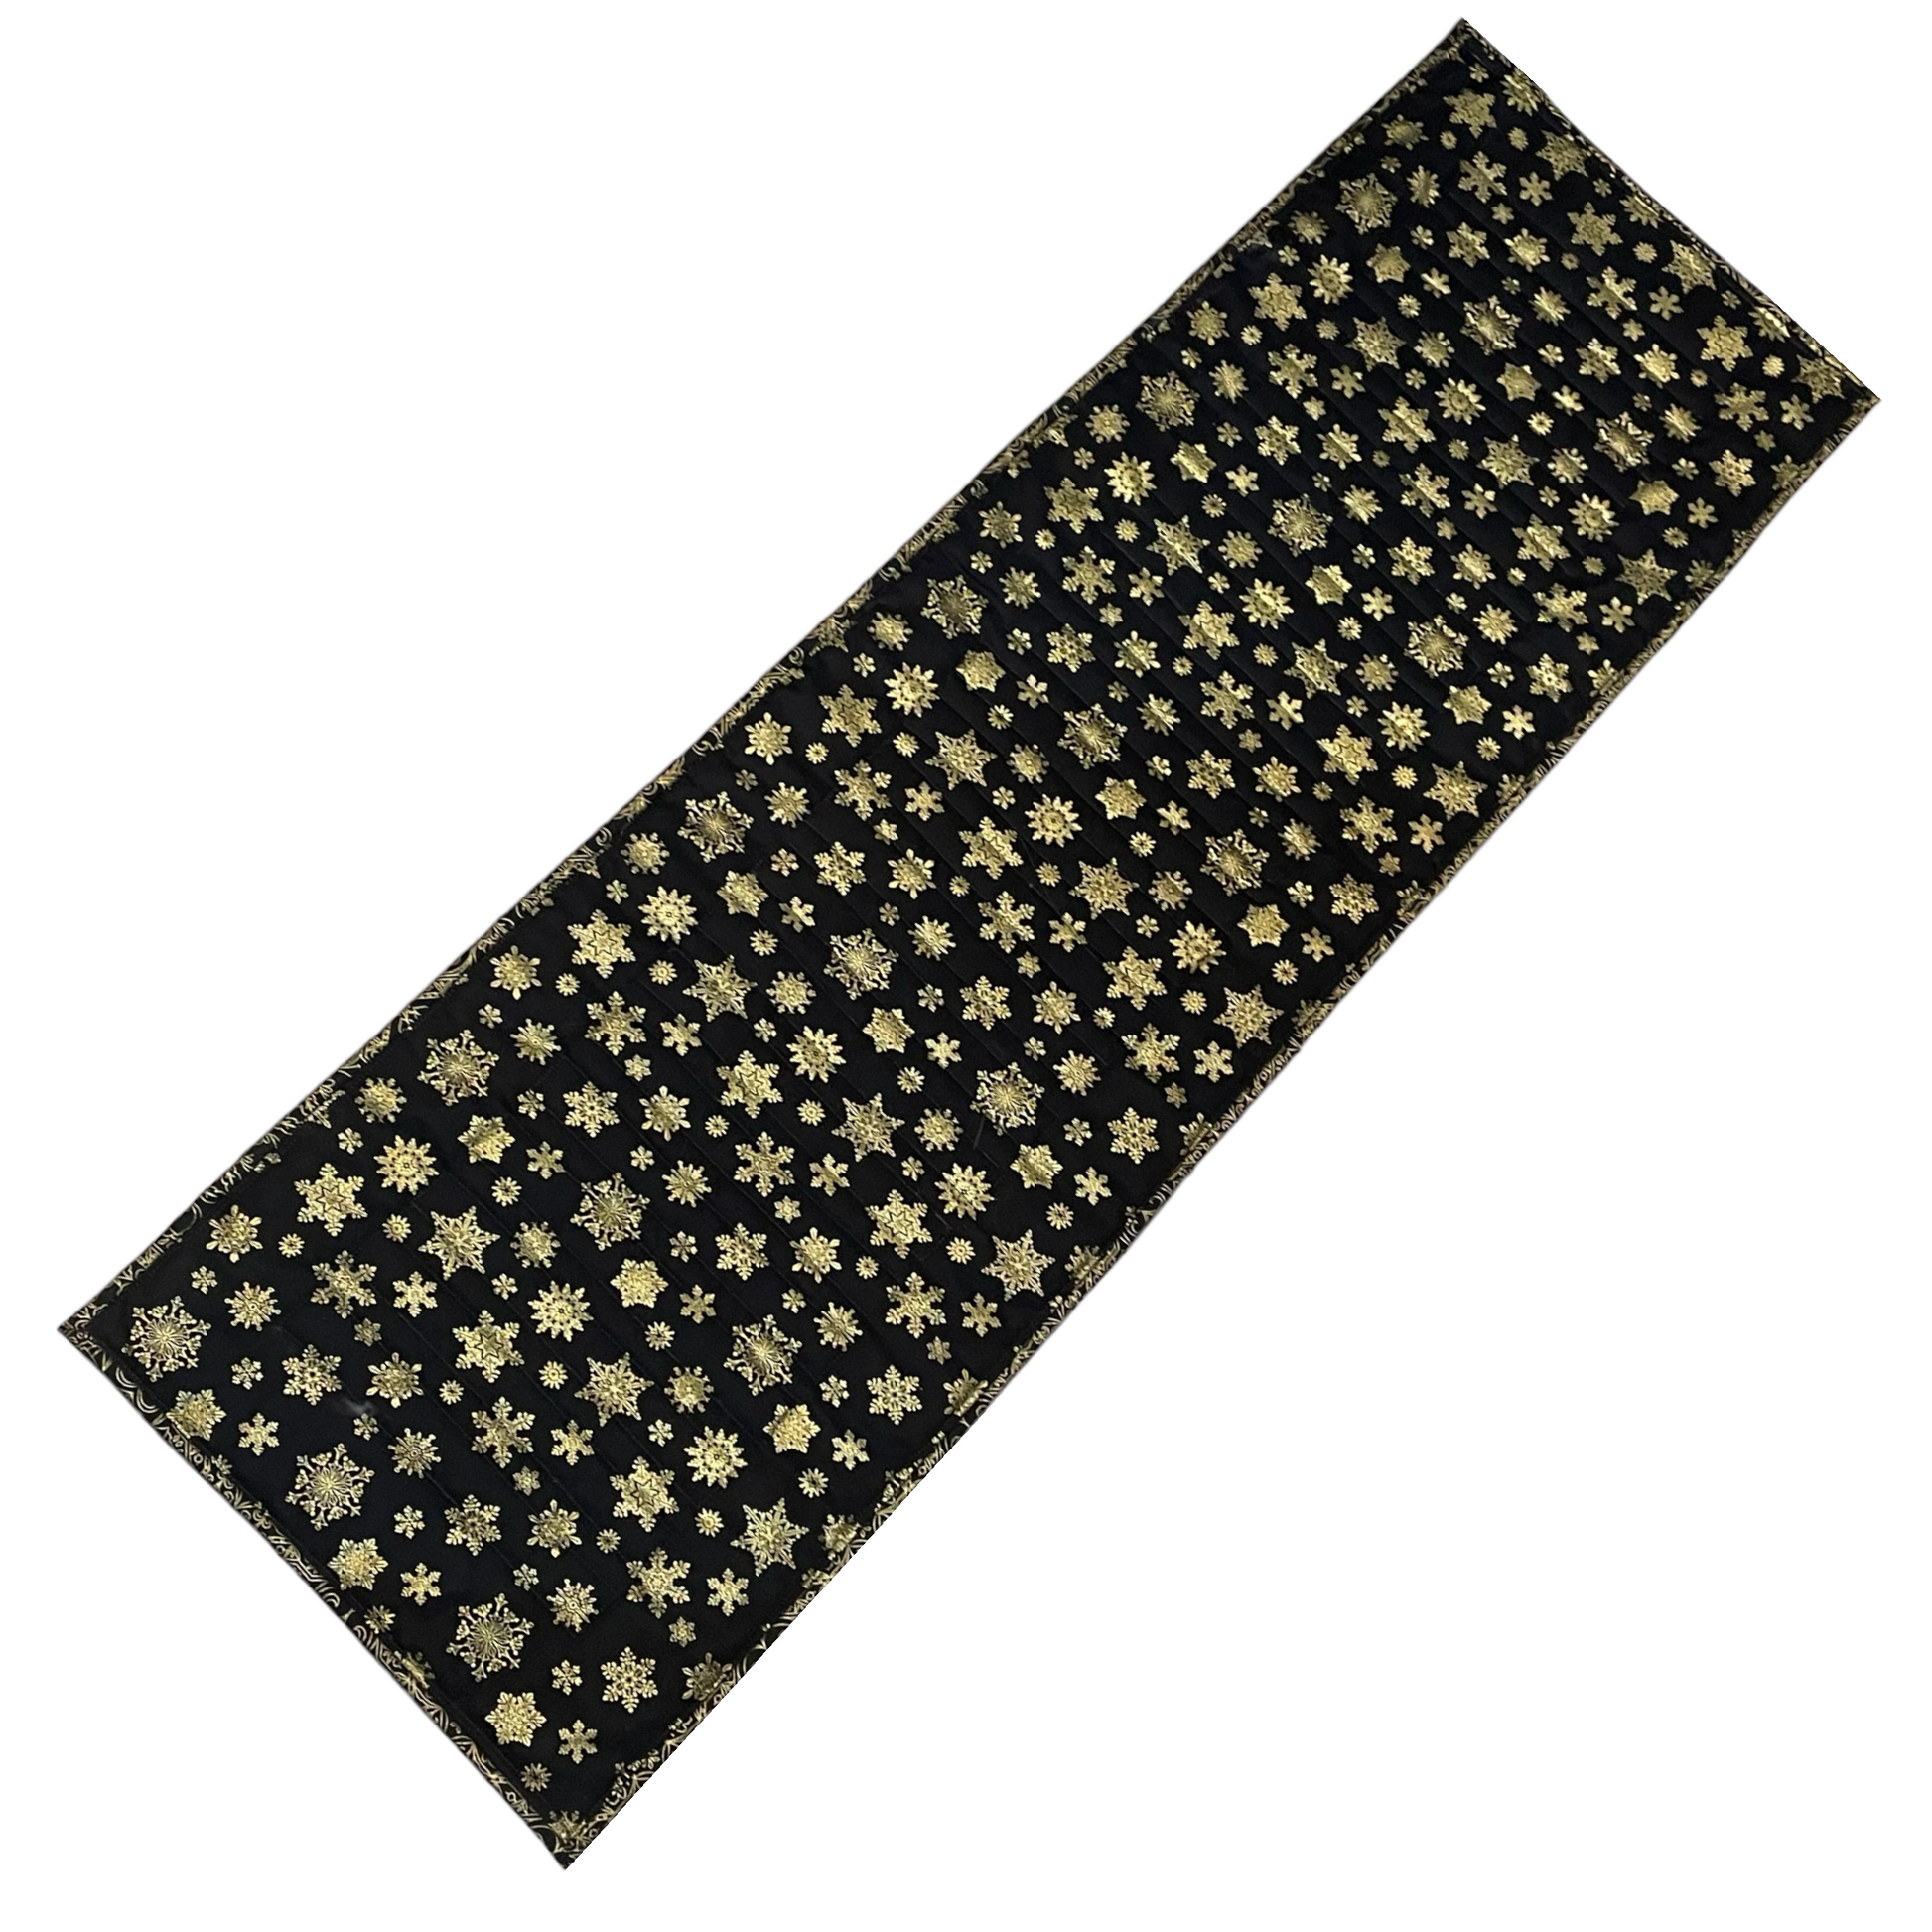 Black and Gold Snowflake Quilted Table Runner - Home Stitchery Decor